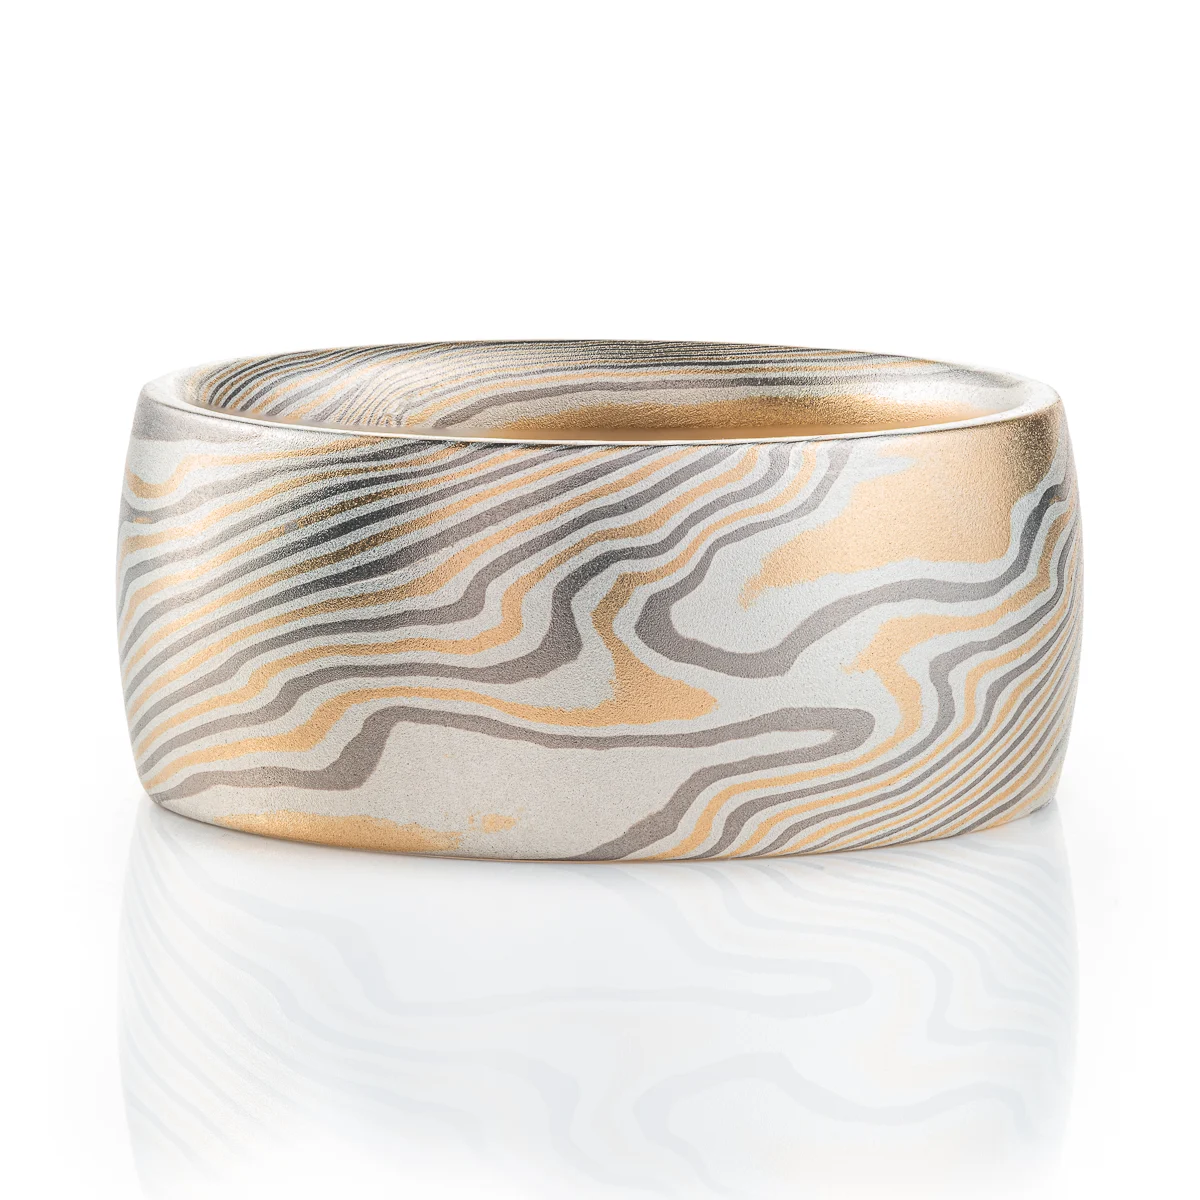 extra wide mokume gane band made in twisted pattern and a combination of yellow gold, palladium and silver, with a low domed profile and smooth finish